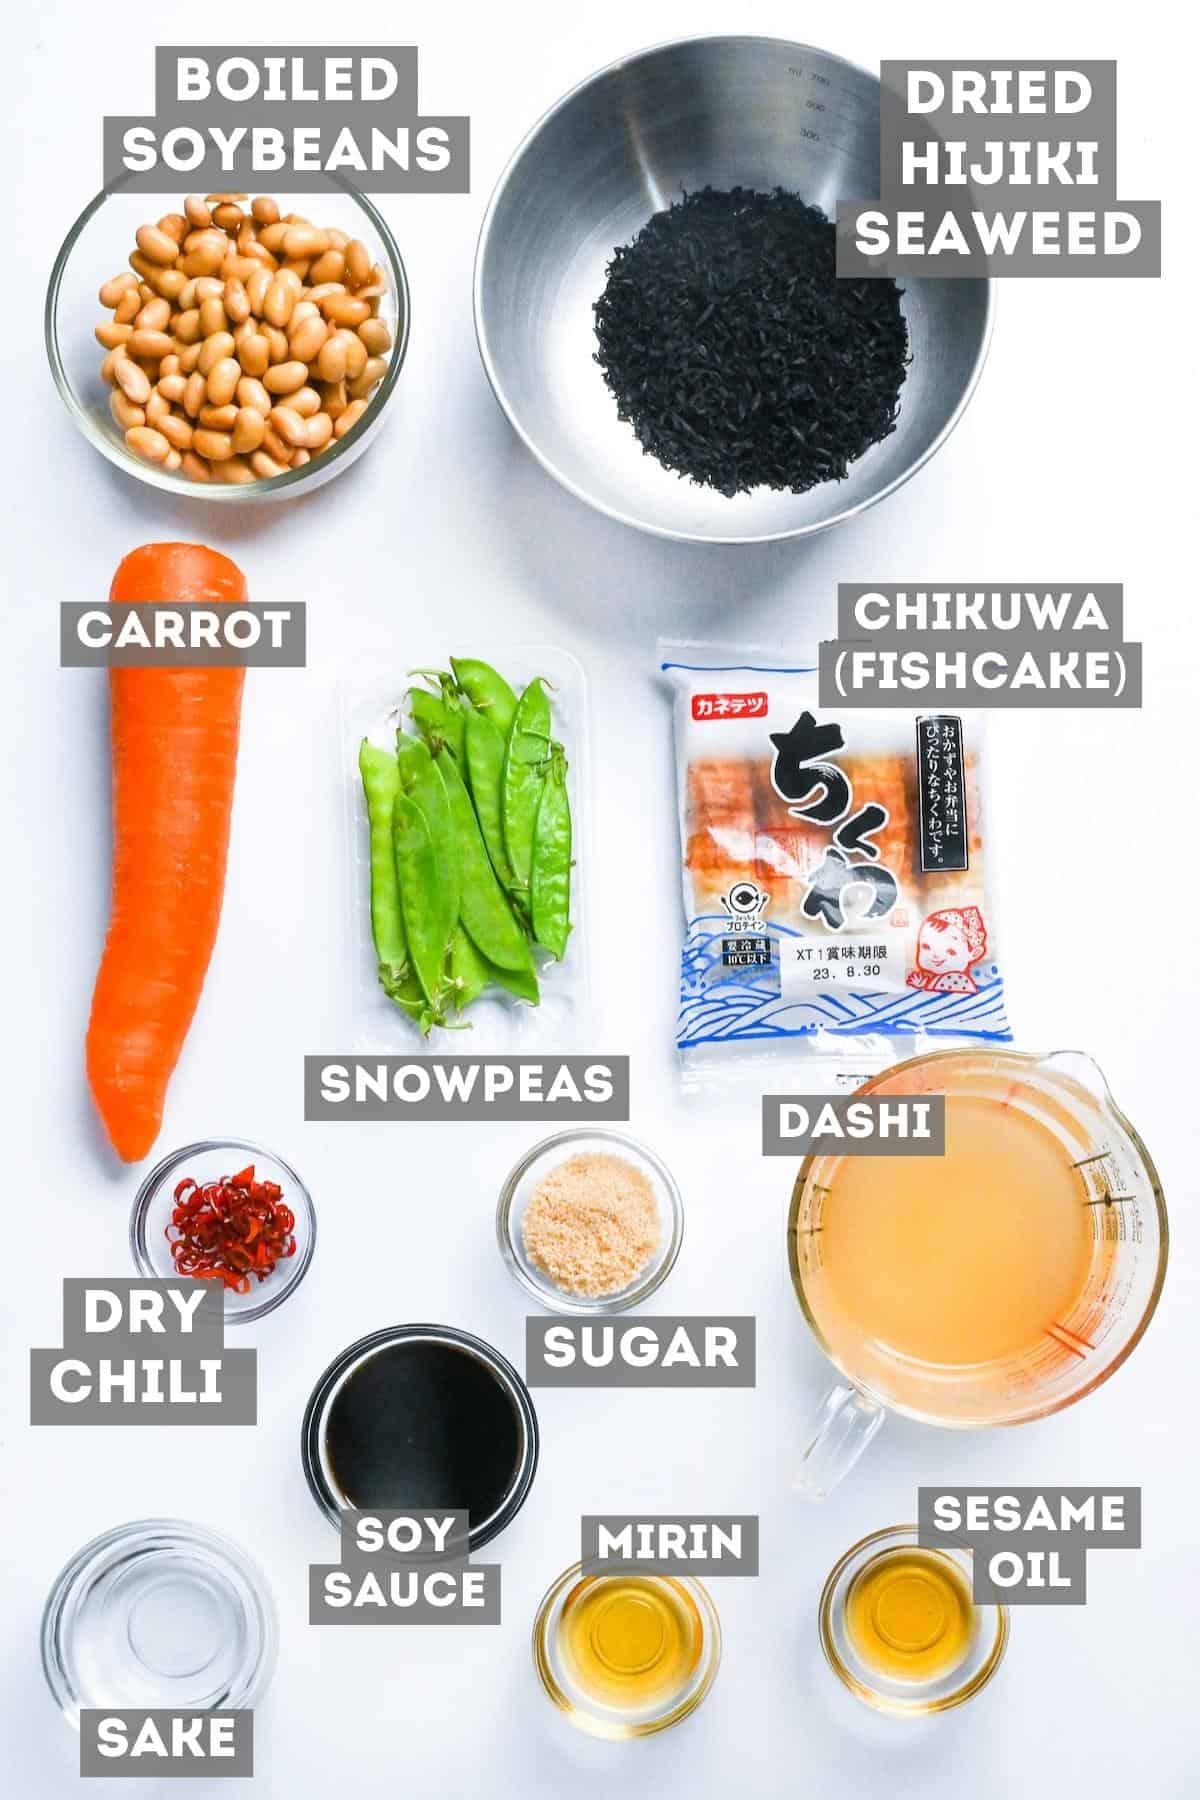 Hijiki salad ingredients on a white background with labels